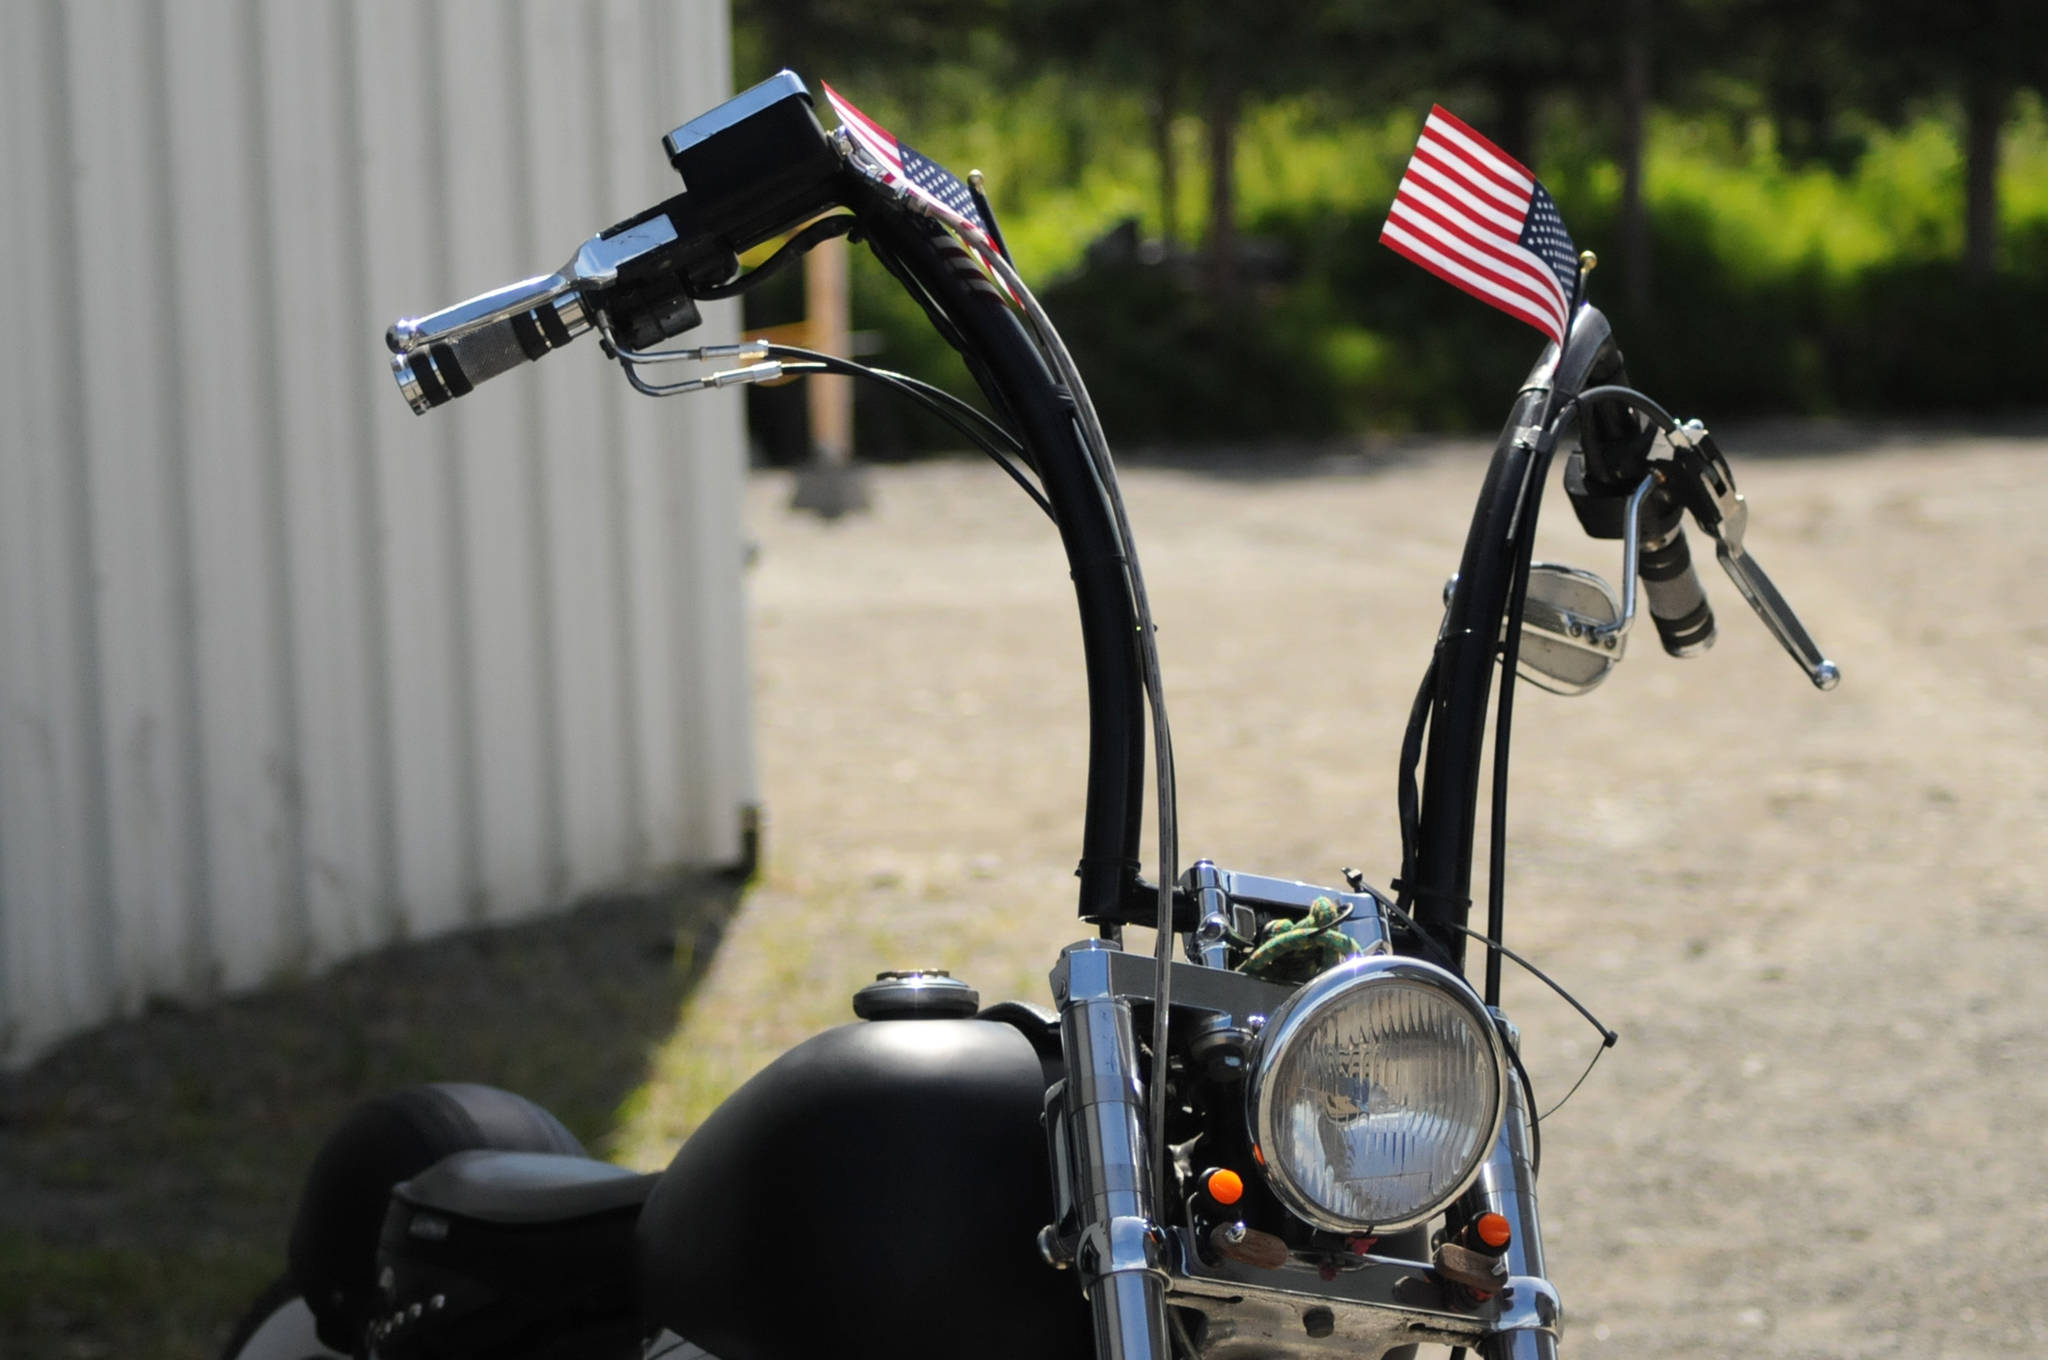 American flags decorate a motocycle outside the doors of the Peninsula Grace Brethren Church at a memorial service for Travis Stubblefield on Saturday, June 30, 2018 in Soldotna, Alaska. Stubblefield, a lifelong resident of the Soldotna area, was killed June 21 in a conflict in Kasilof. Alaska State Troopers are investigating the circumstances of his death, though no charges have yet been filed. (Photo by Elizabeth Earl/Peninsula Clarion)